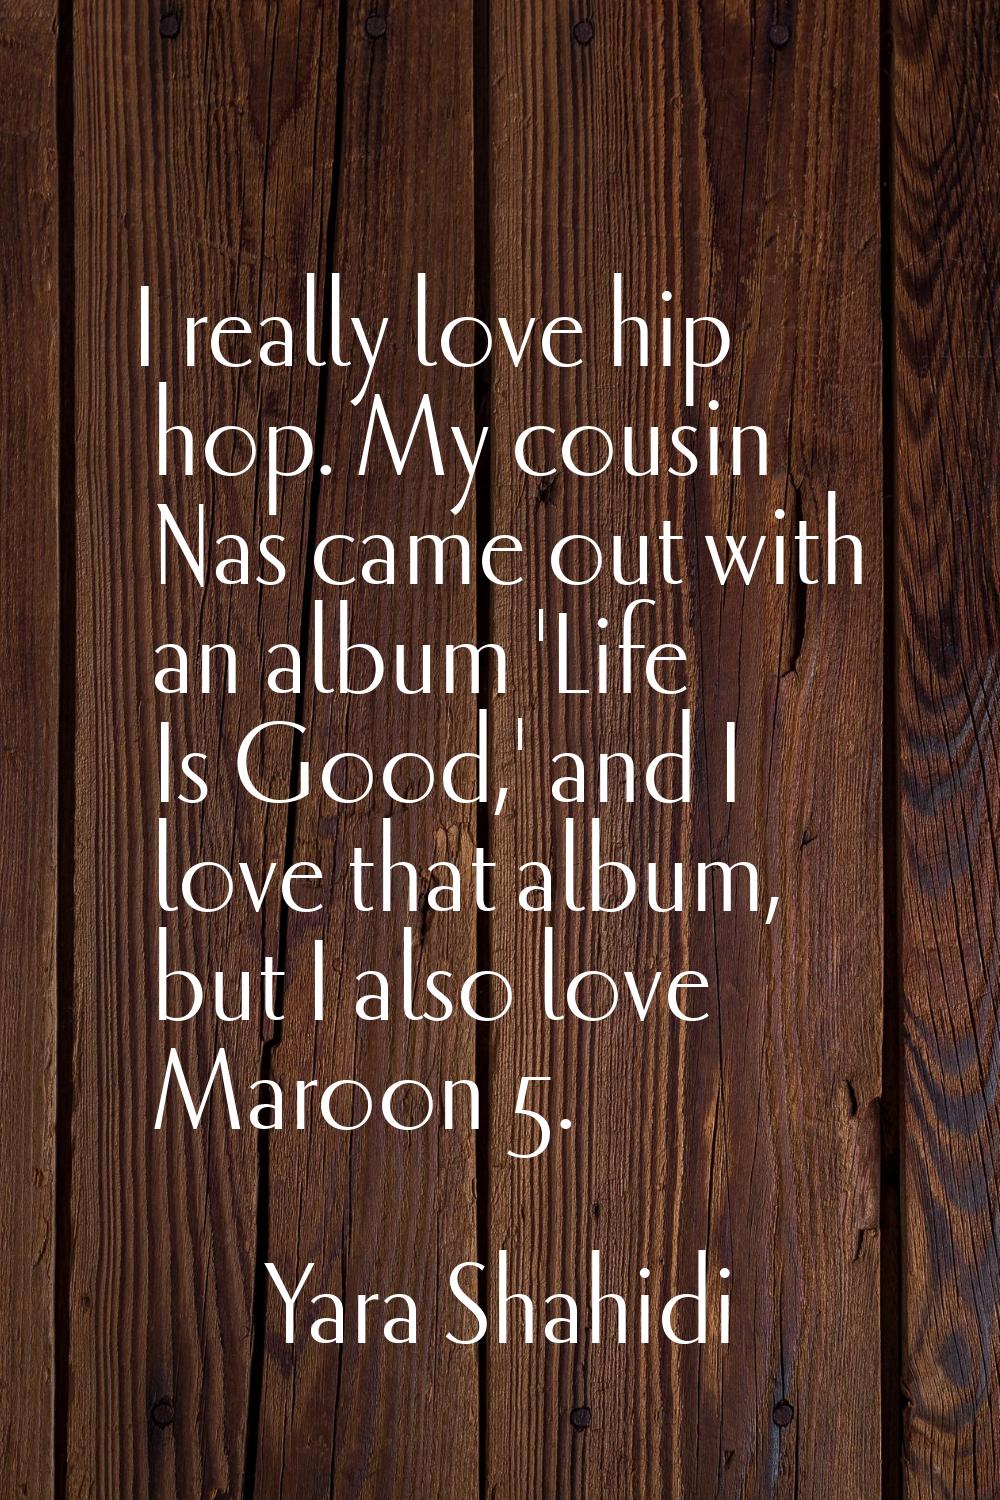 I really love hip hop. My cousin Nas came out with an album 'Life Is Good,' and I love that album, 